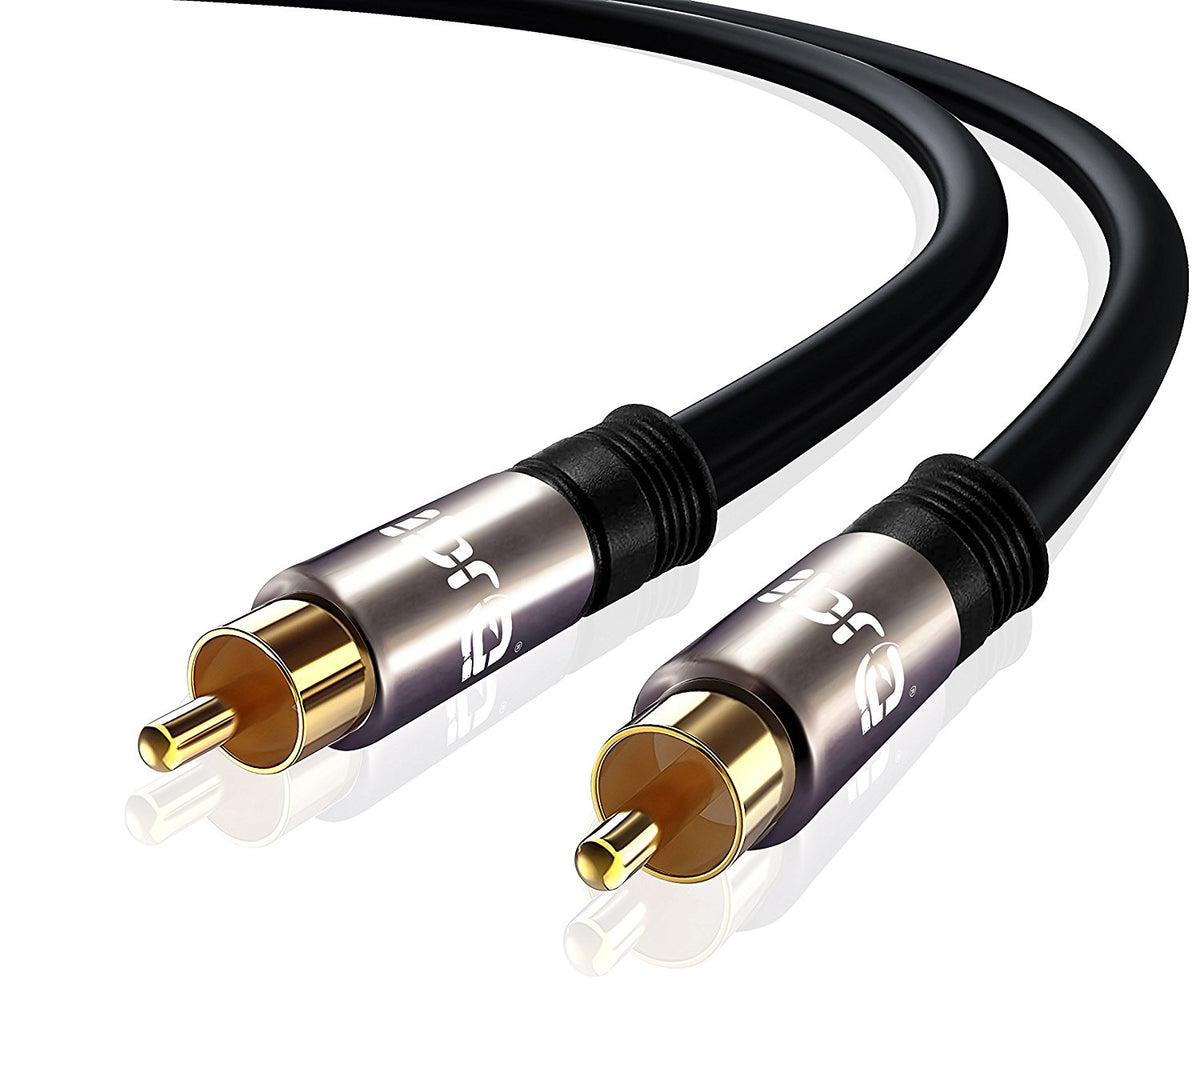 IBRA 1M Digital Coaxial Cable / Subwoofer Cable / Audio Cable / RCA Cable (1 x RCA to 1 x RCA) - Gun Metal range